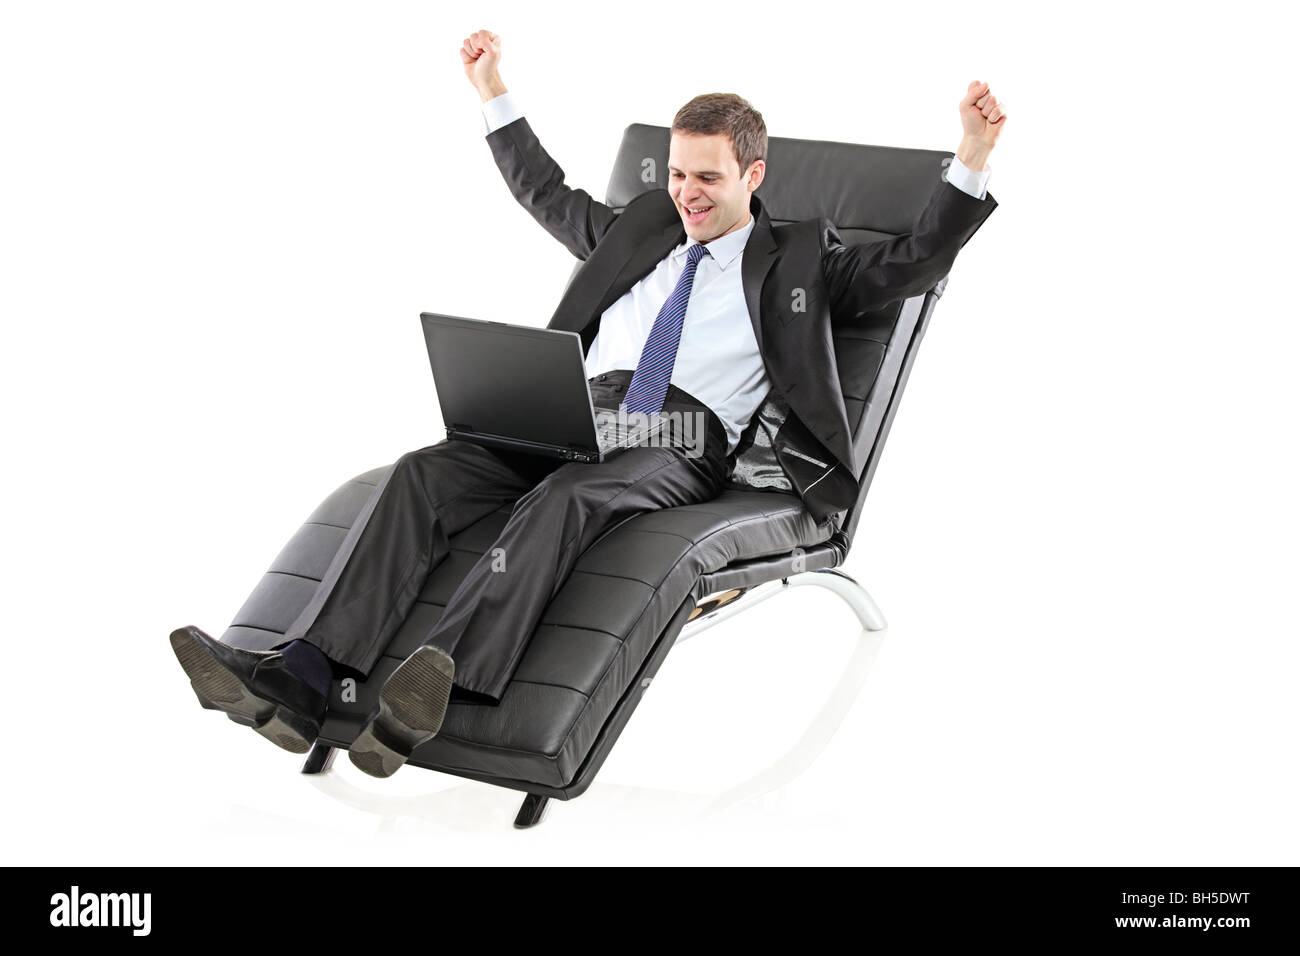 Businessman lying on a black leather chair with a laptop in his lap Stock Photo